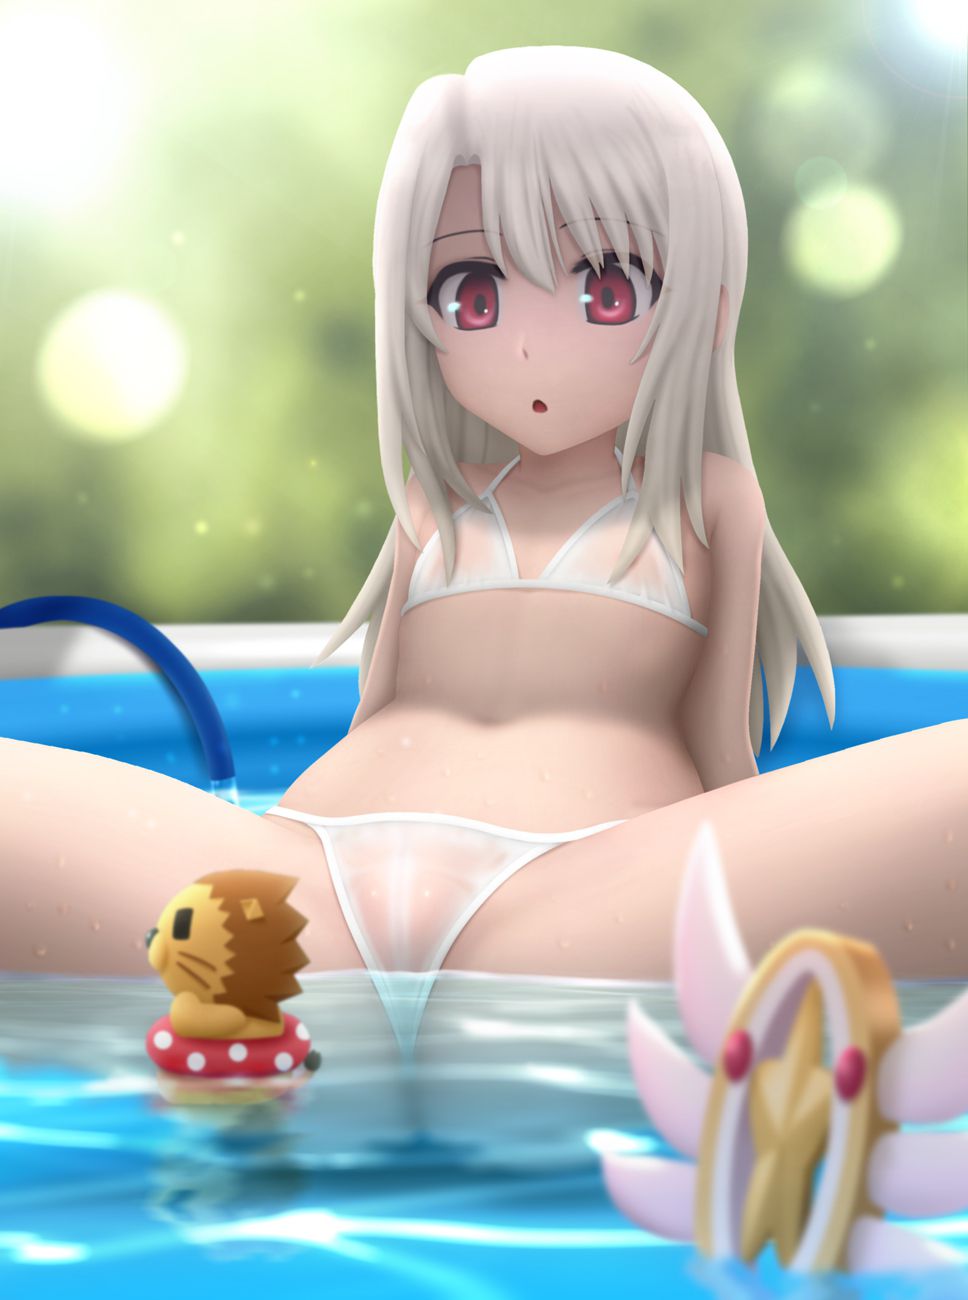 [35 pieces] Overflow, and a feeling of lily lily ロリレズ likes プリズマ ☆ Ilya; is an eroticism image of such プリズマイリヤ! 17